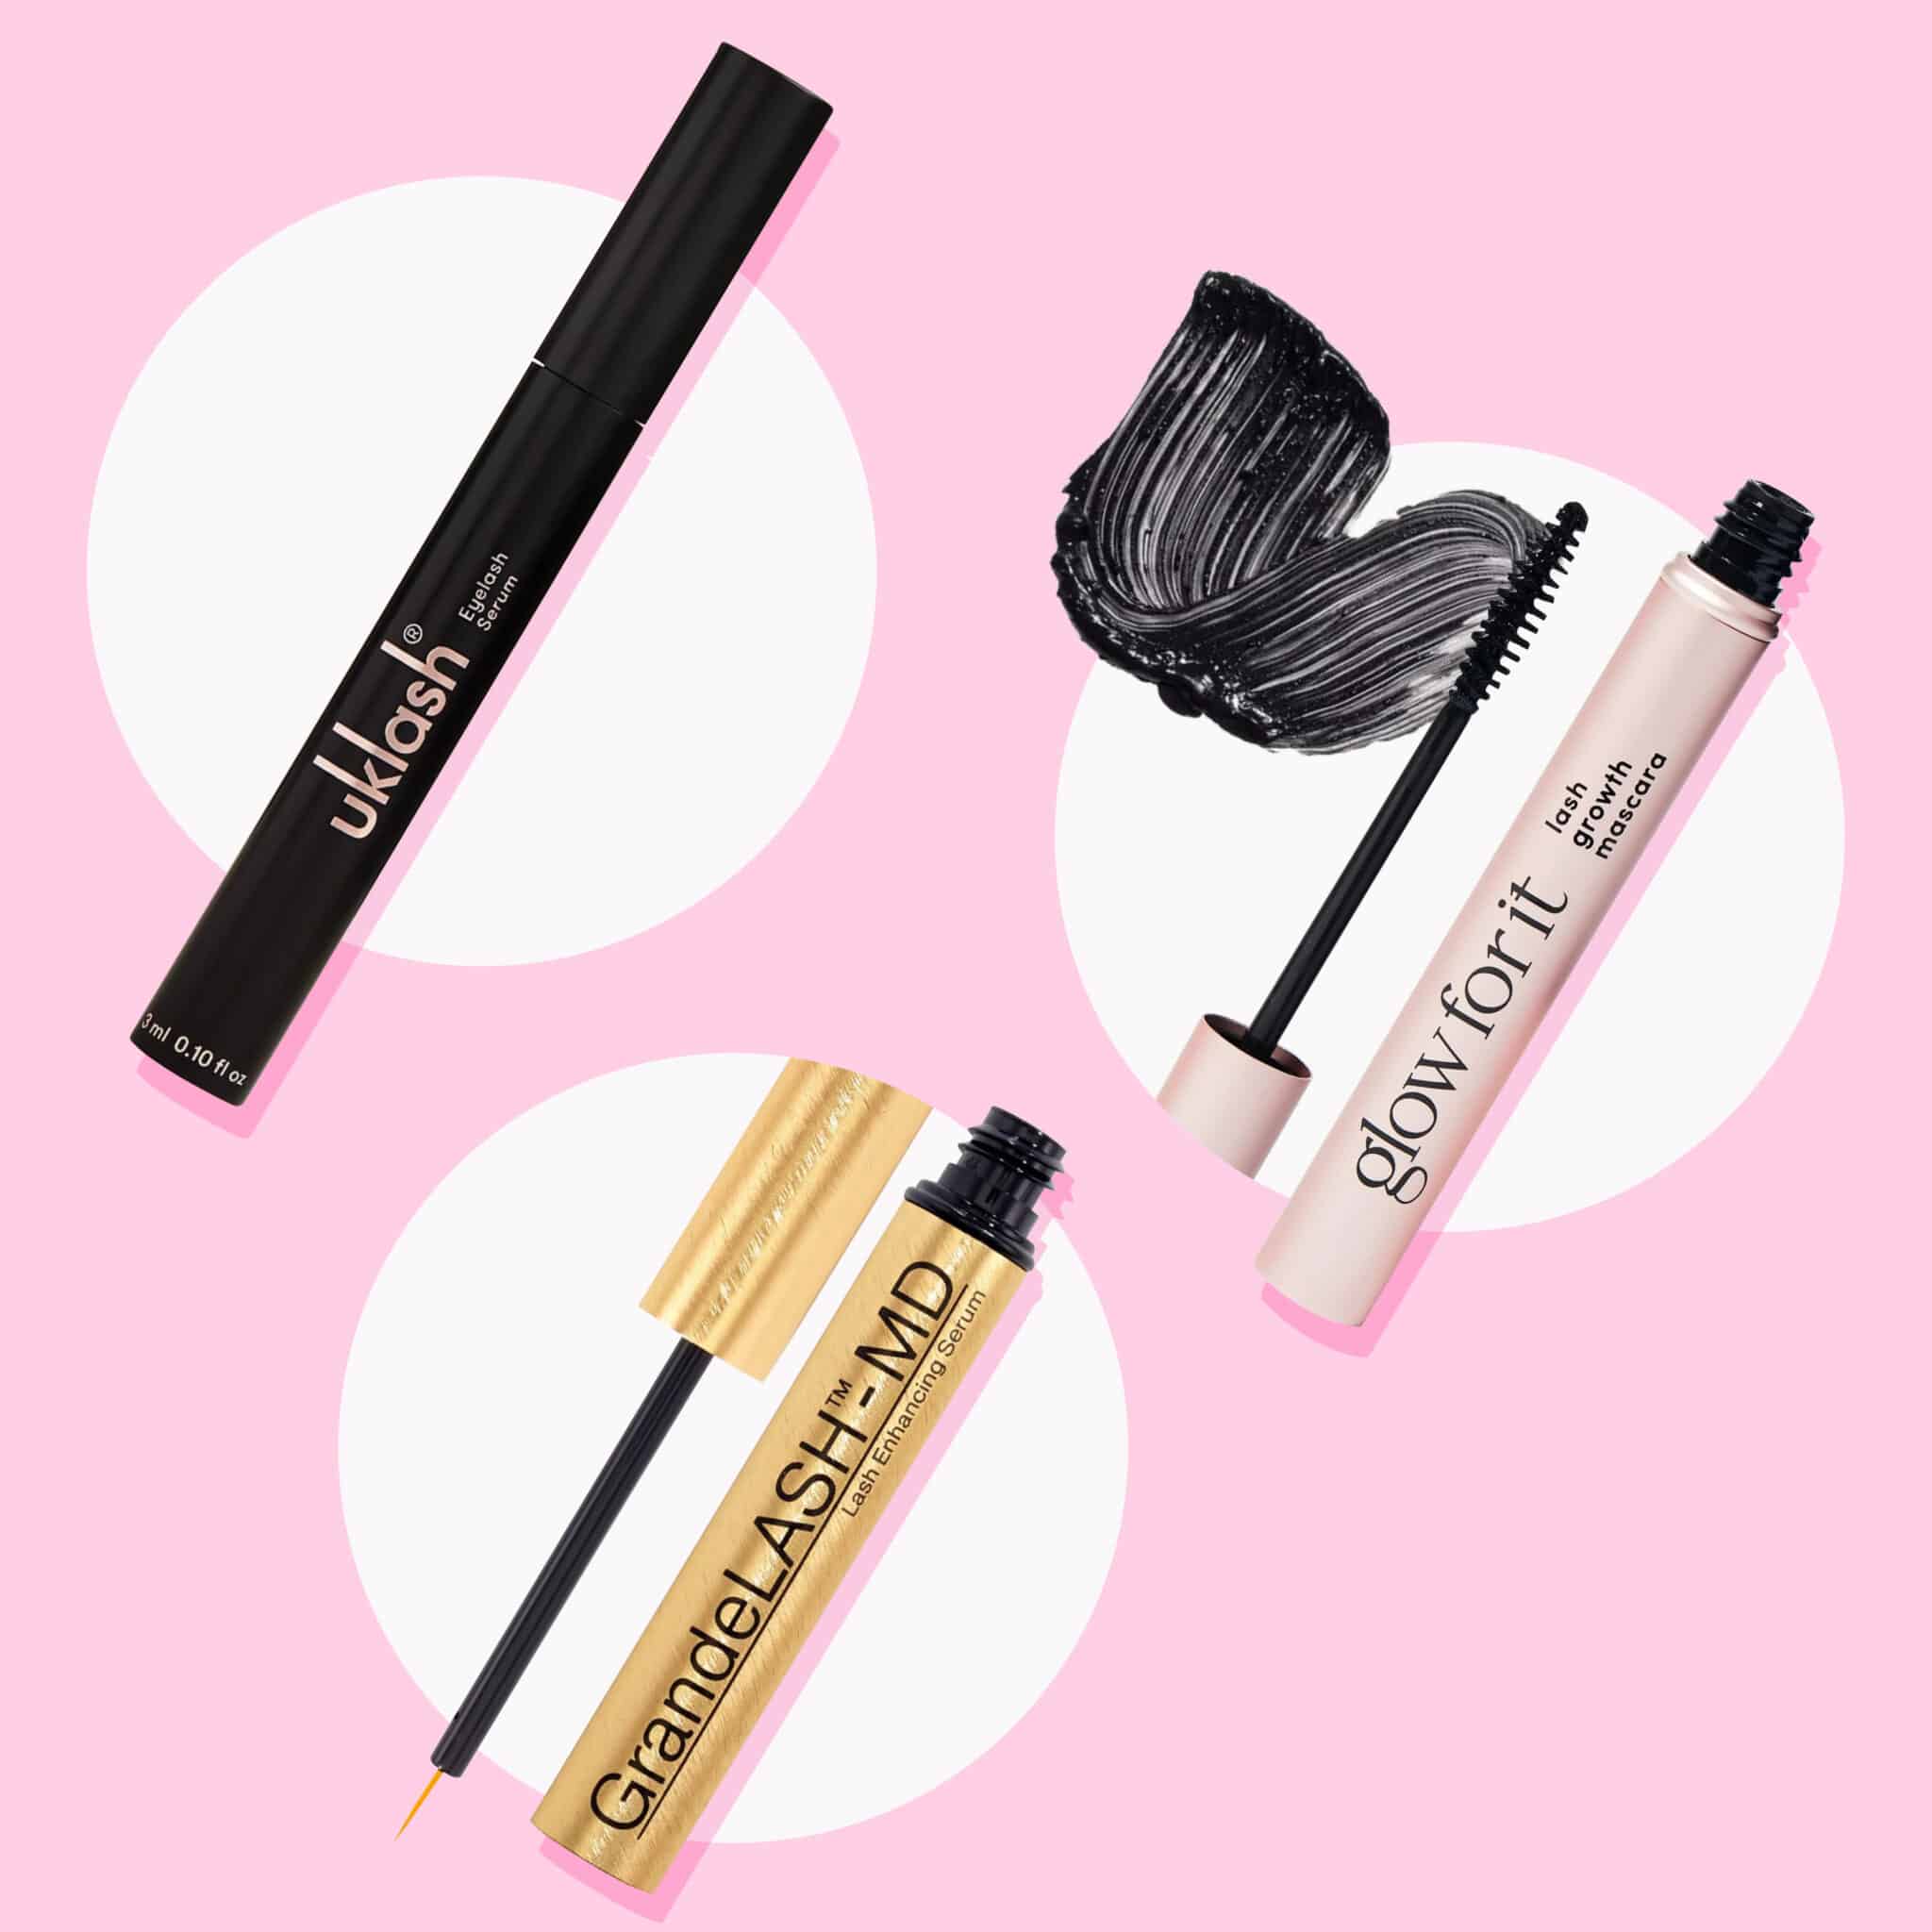 Tried and Tested: The Best Eyelash Growth Serums